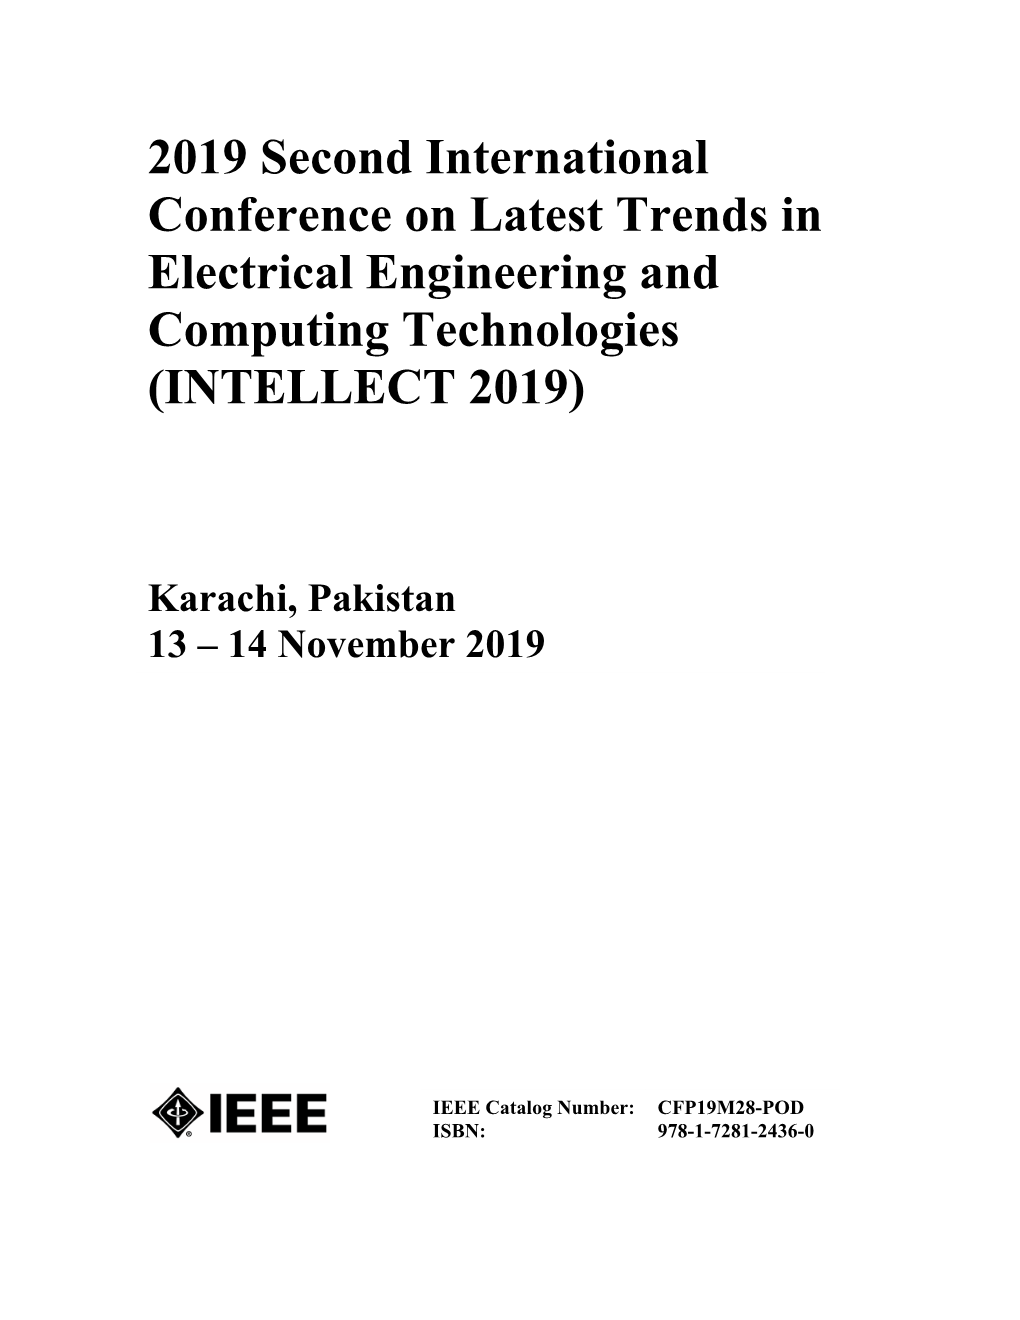 2019 Second International Conference on Latest Trends in Electrical Engineering and Computing Technologies